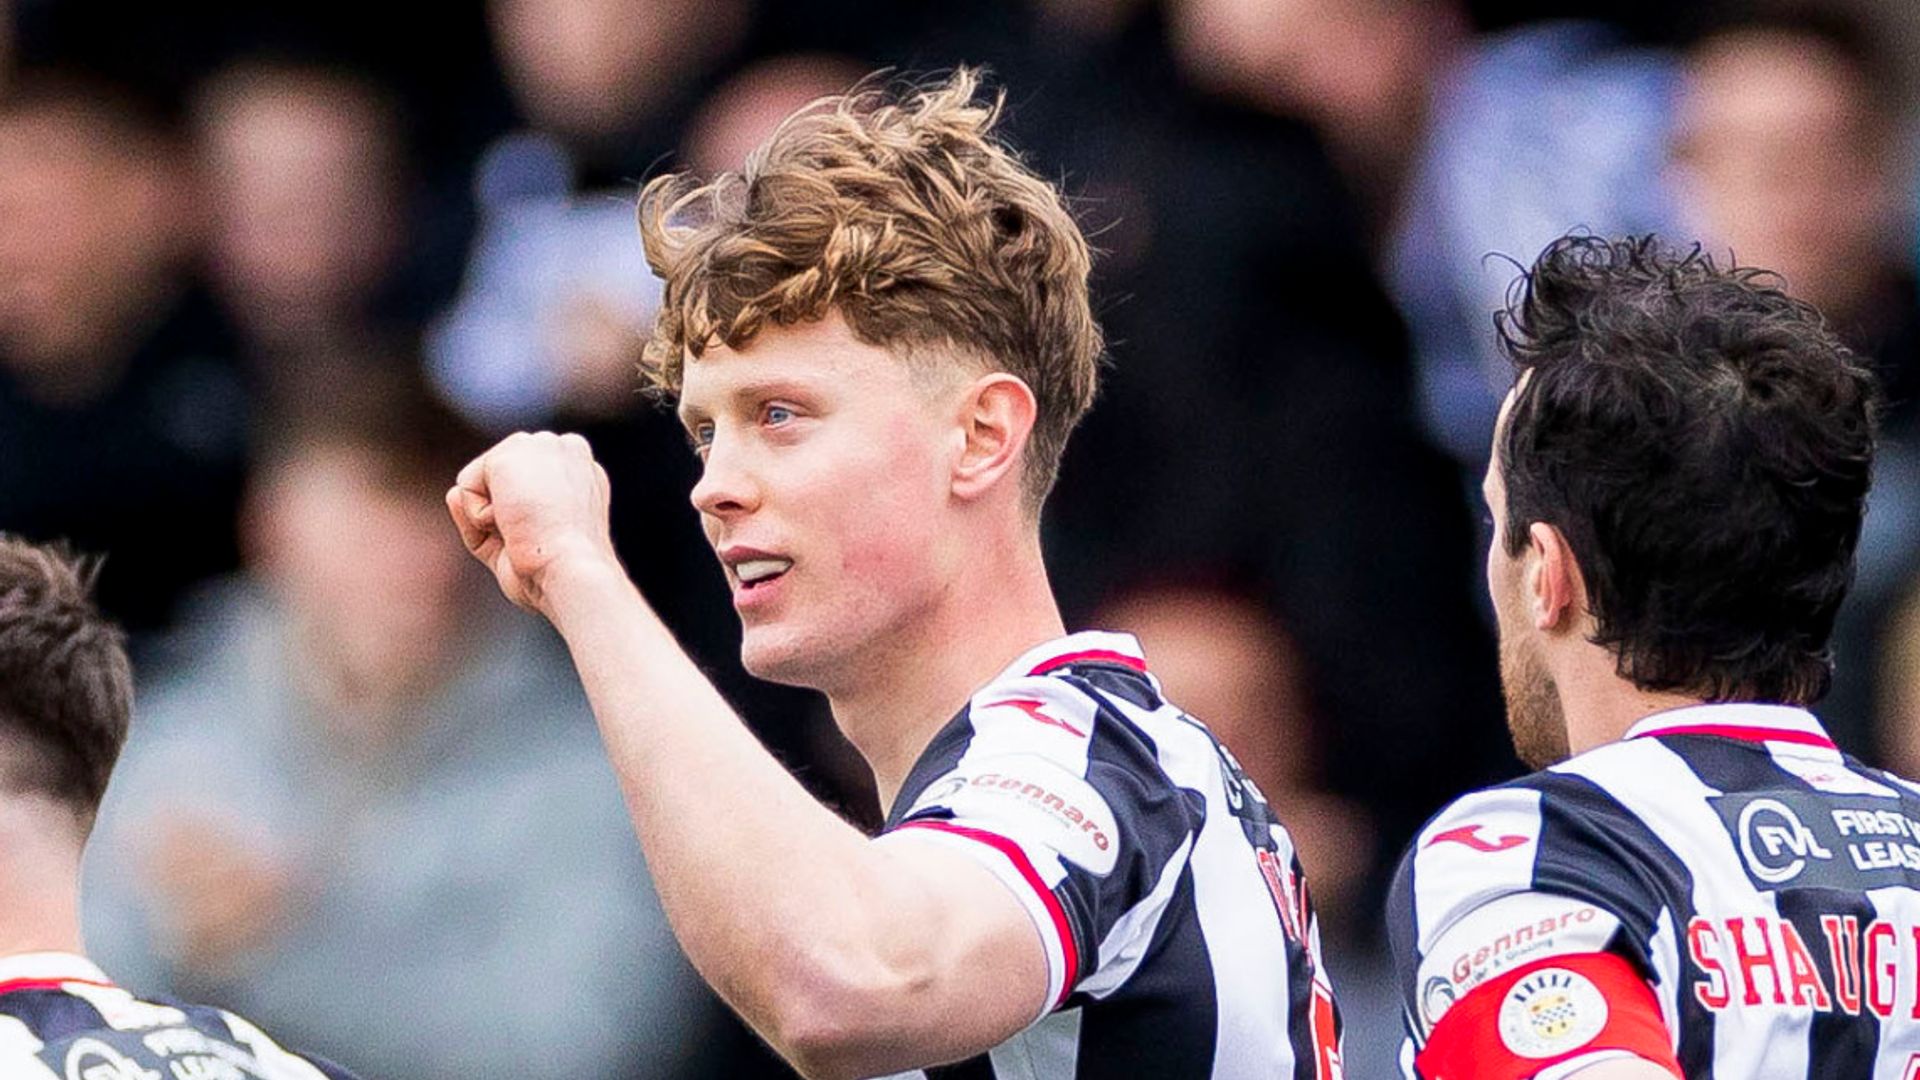 O'Hara scores two penalties as St Mirren see off Livingston